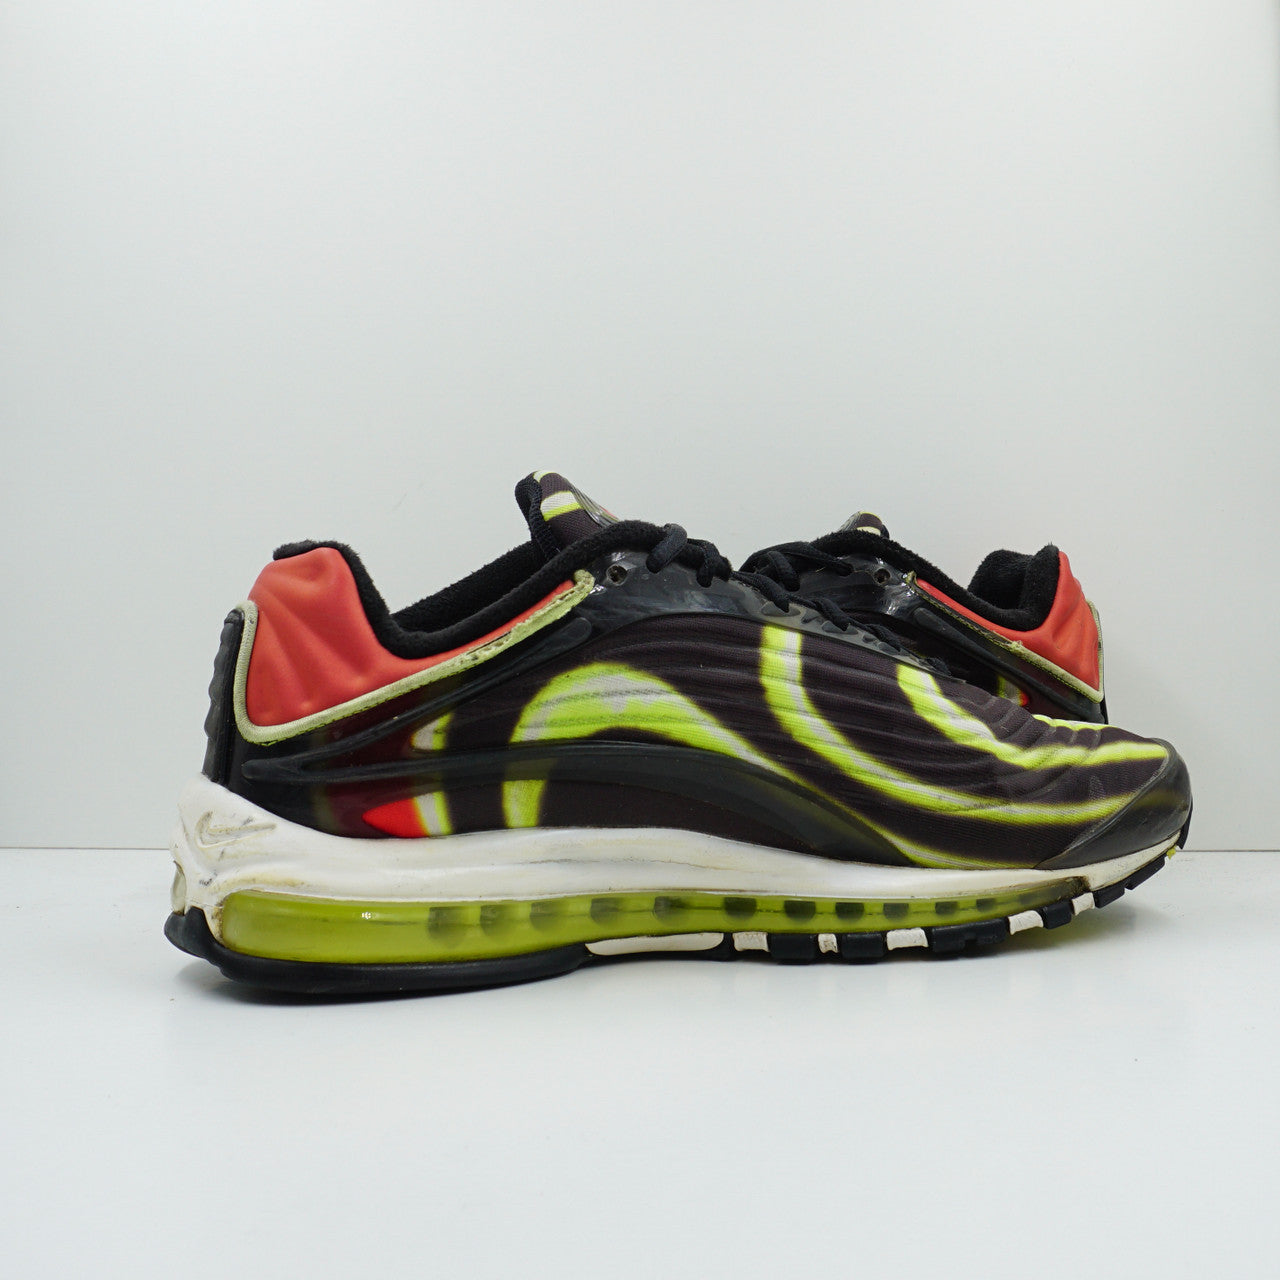 Nike Air Max Deluxe Black Volt Habanero Red